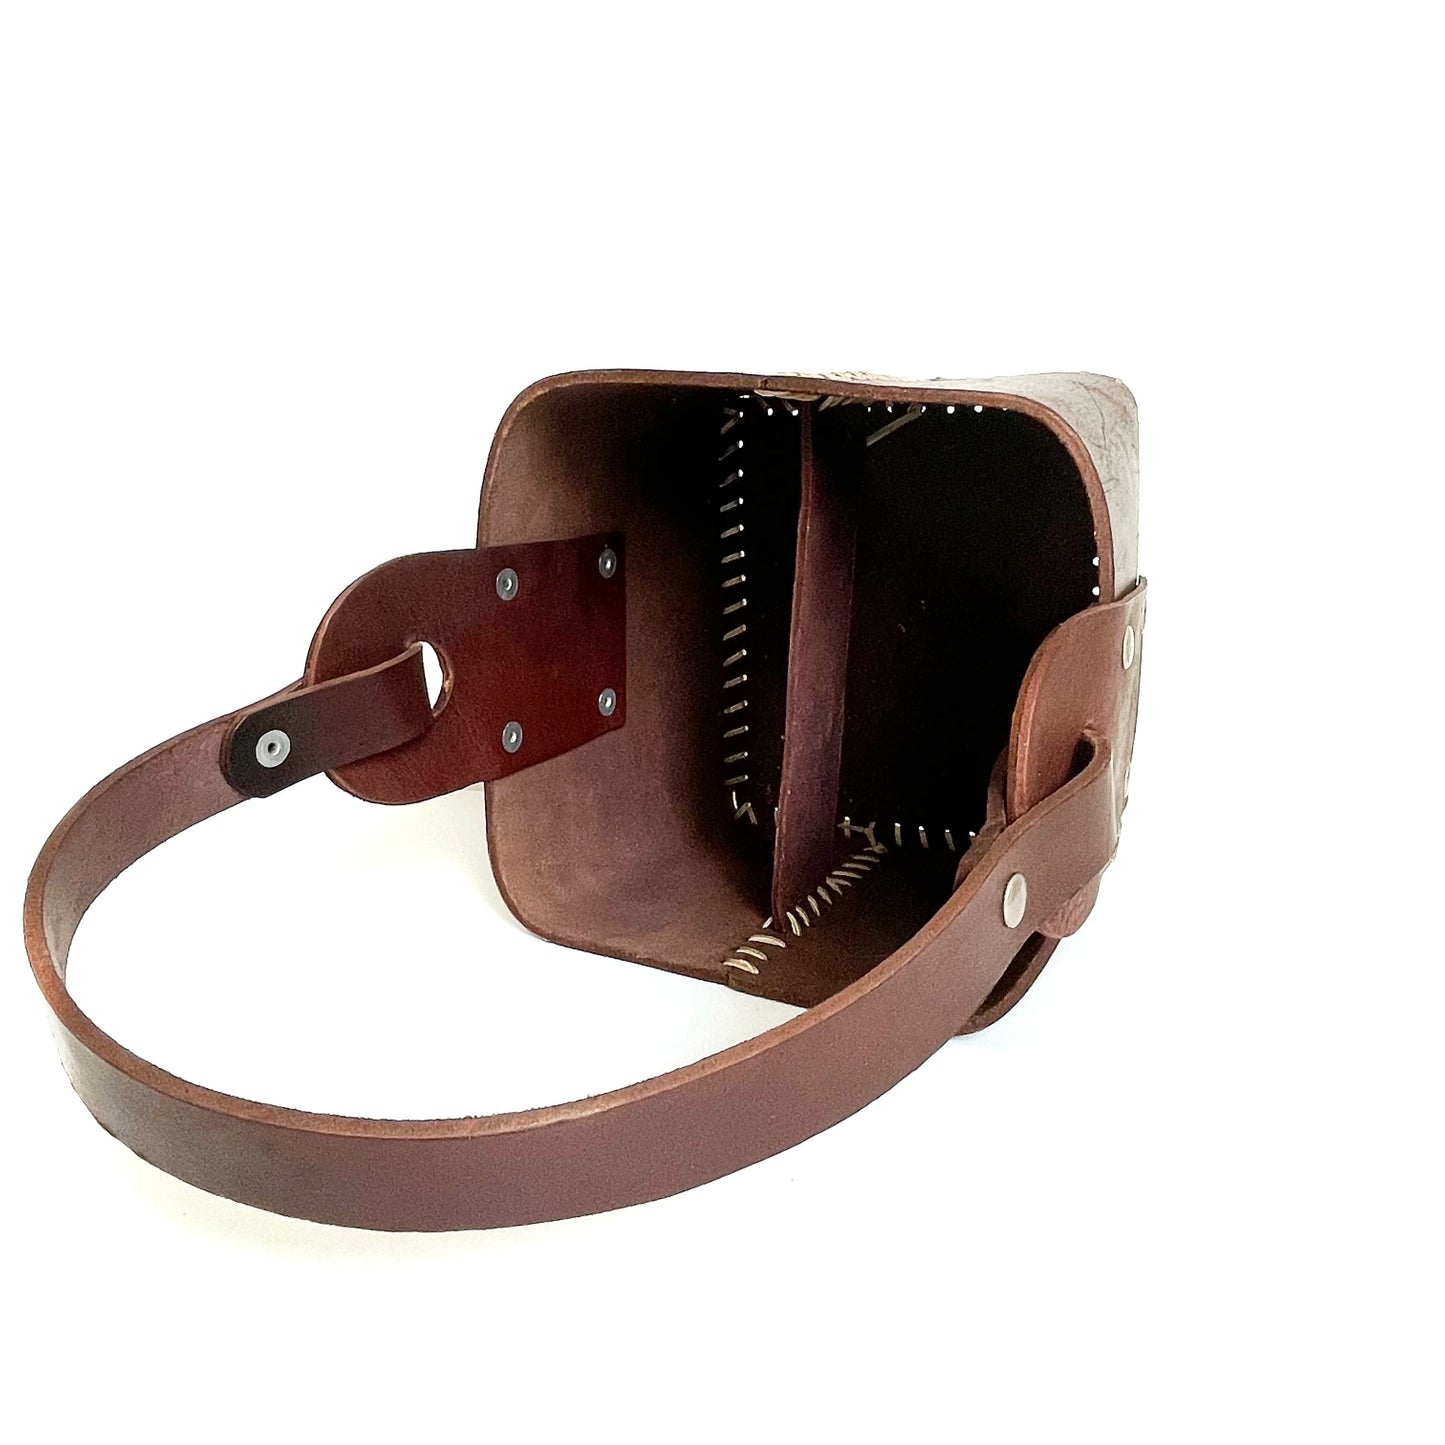 Rigid material in smooth brown leather 